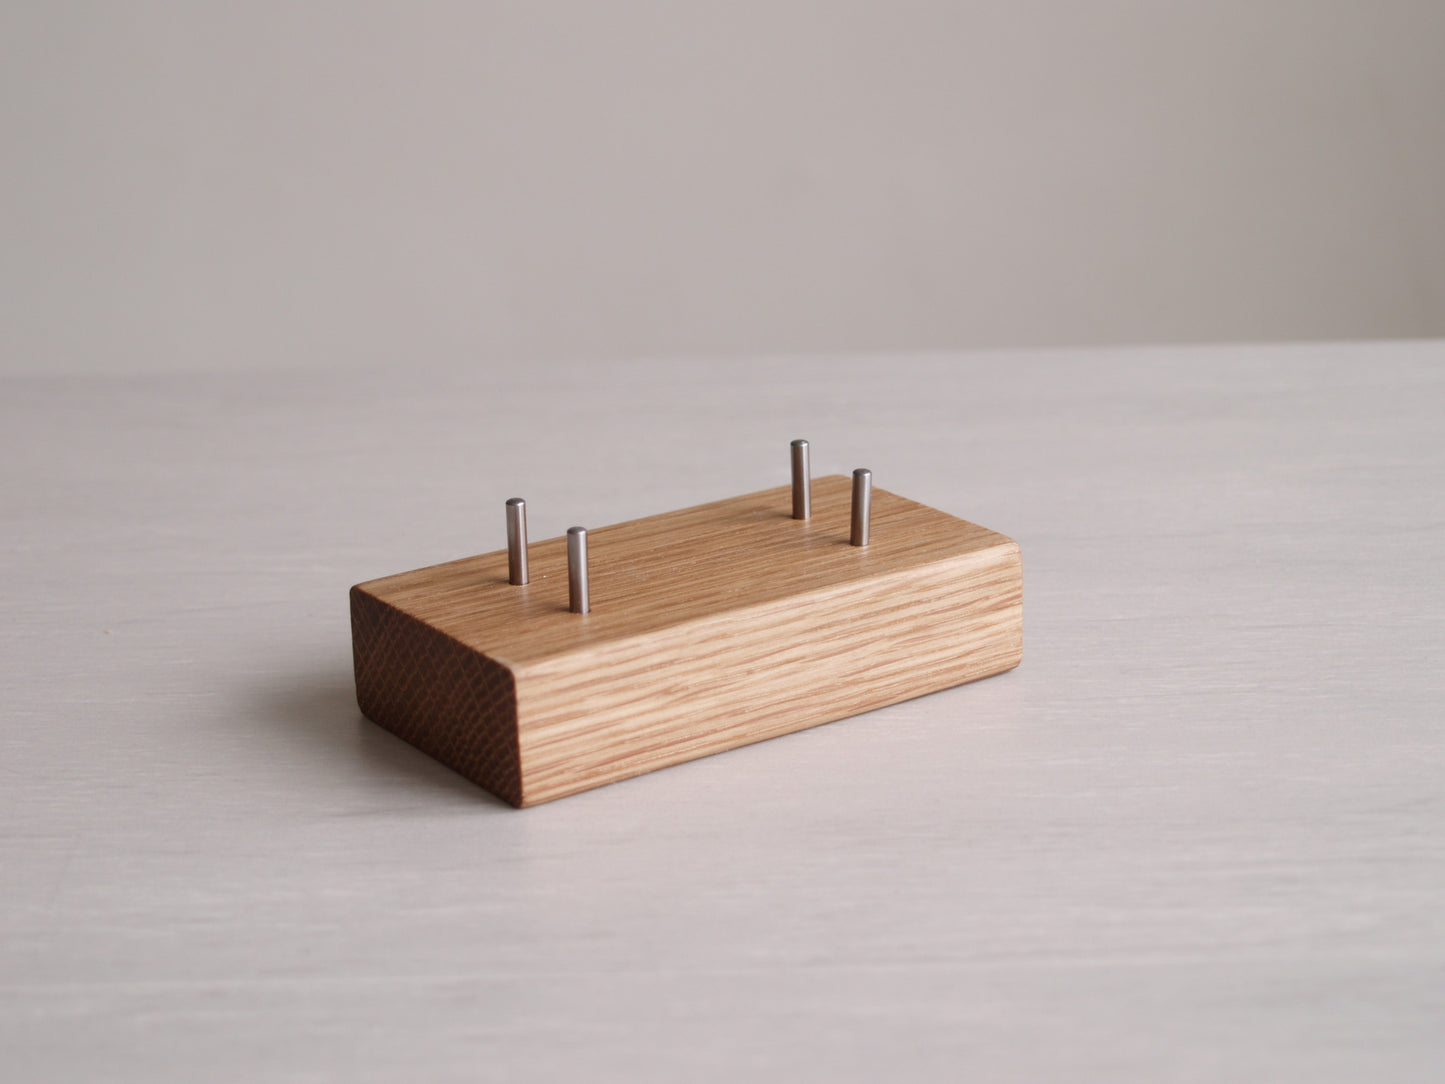 A small block of solid oak with four stainless steel pins, used for holding business cards.